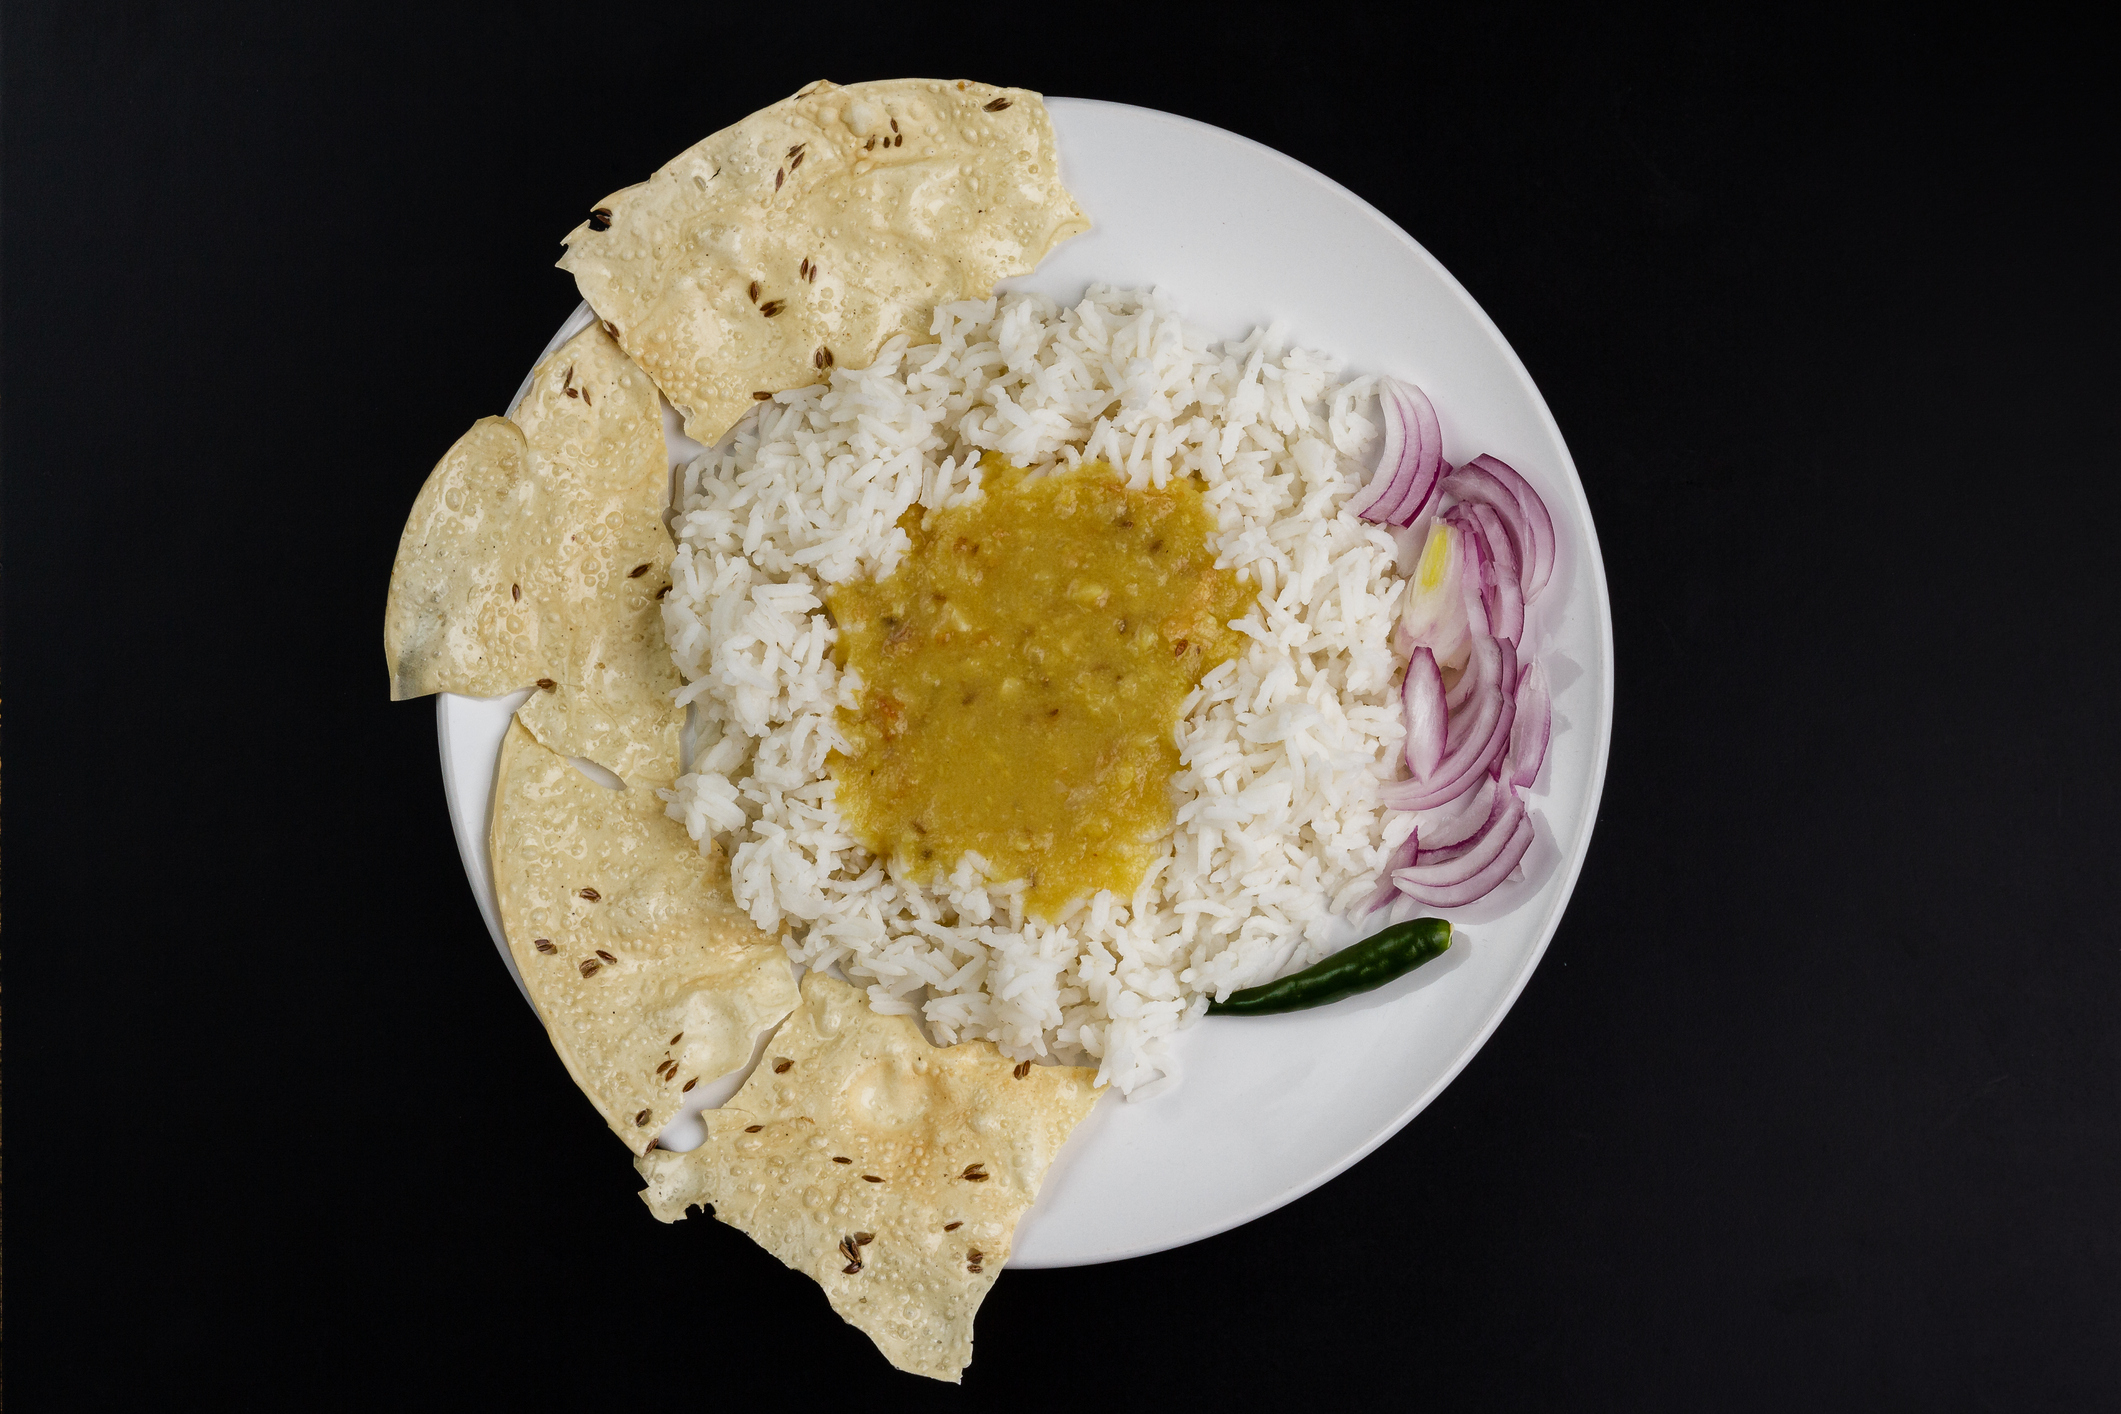 A plate with rice, lentil curry, papadum, a green chili, and sliced onions